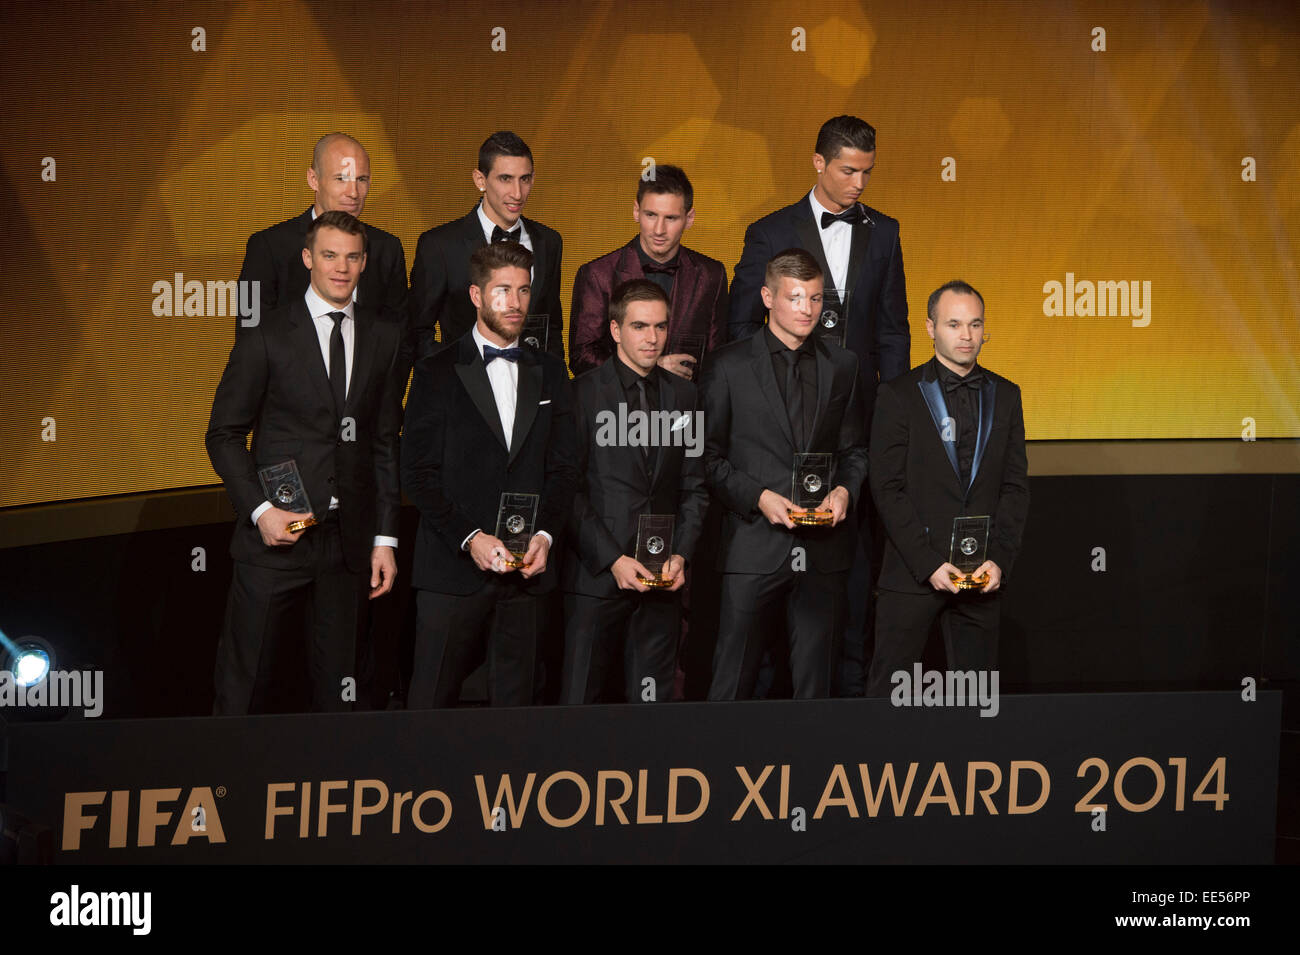 Zurich, Switzerland. 12th Jan, 2015. Winners of FIFA/FIFPro World XI 2014 Football/Soccer : Winners of the FIFA/FIFPro World XI 2014 (Top row - L to R) Arjen Robben, Angel Di Maria, Lionel Messi, Cristiano Ronaldo, (Bottom row - L to R) Manuel Neuer, Sergio Ramos, Philipp Lahm, Toni Kroos and Andres Iniesta pose with their trophies during the FIFA Ballon d'Or 2014 Gala at Kongresshaus in Zurich, Switzerland . © Maurizio Borsari/AFLO/Alamy Live News Stock Photo